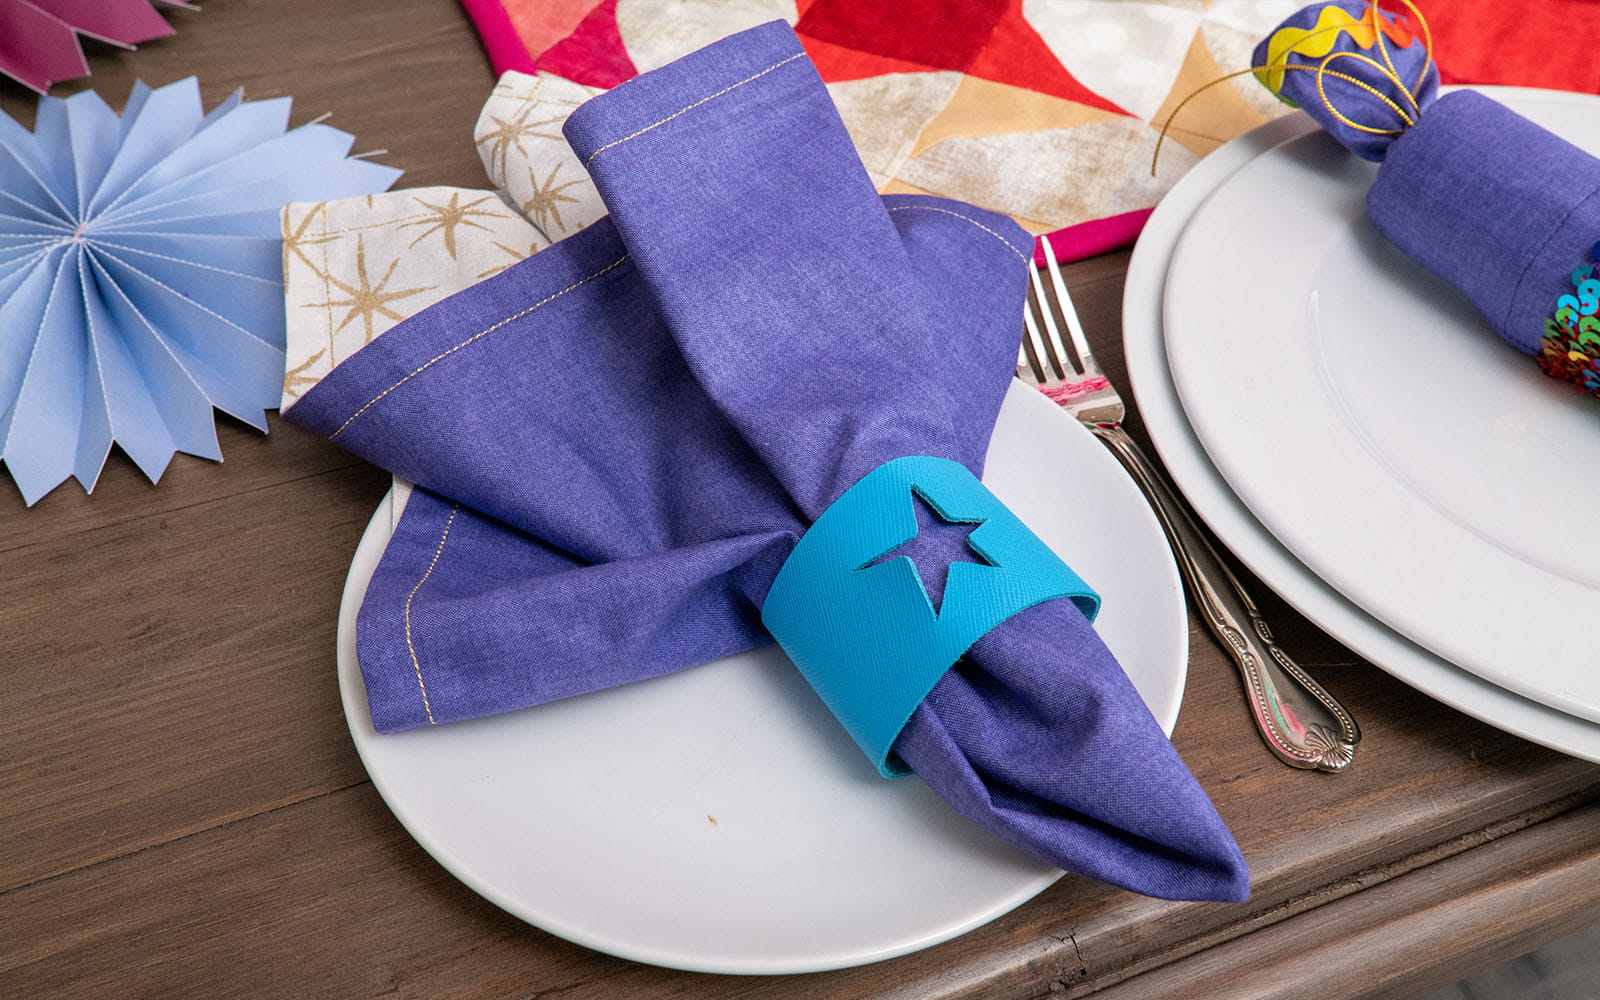 cloth napkin with napkin ring on plate